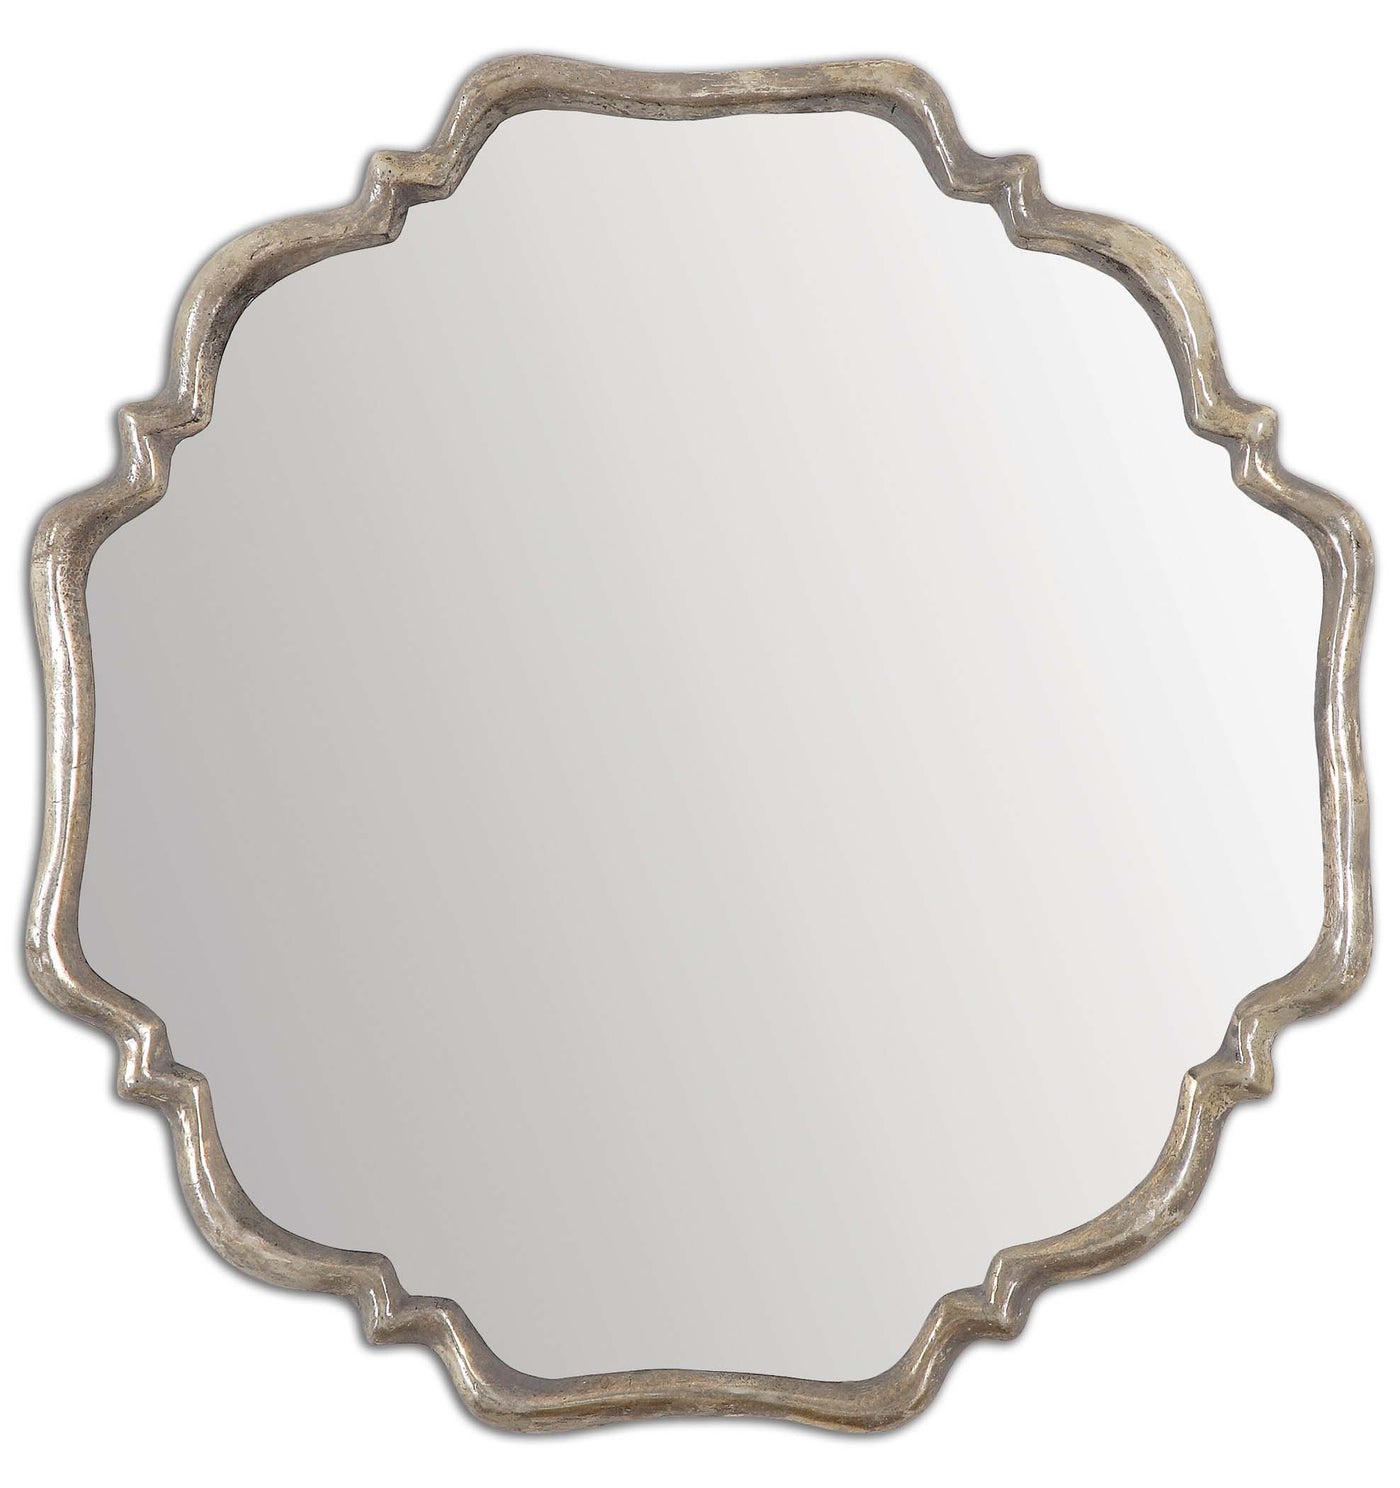 This Shapely Mirror Features A Frame With A Plated, Oxidized Silver Finish And A Rust Gray Wash.